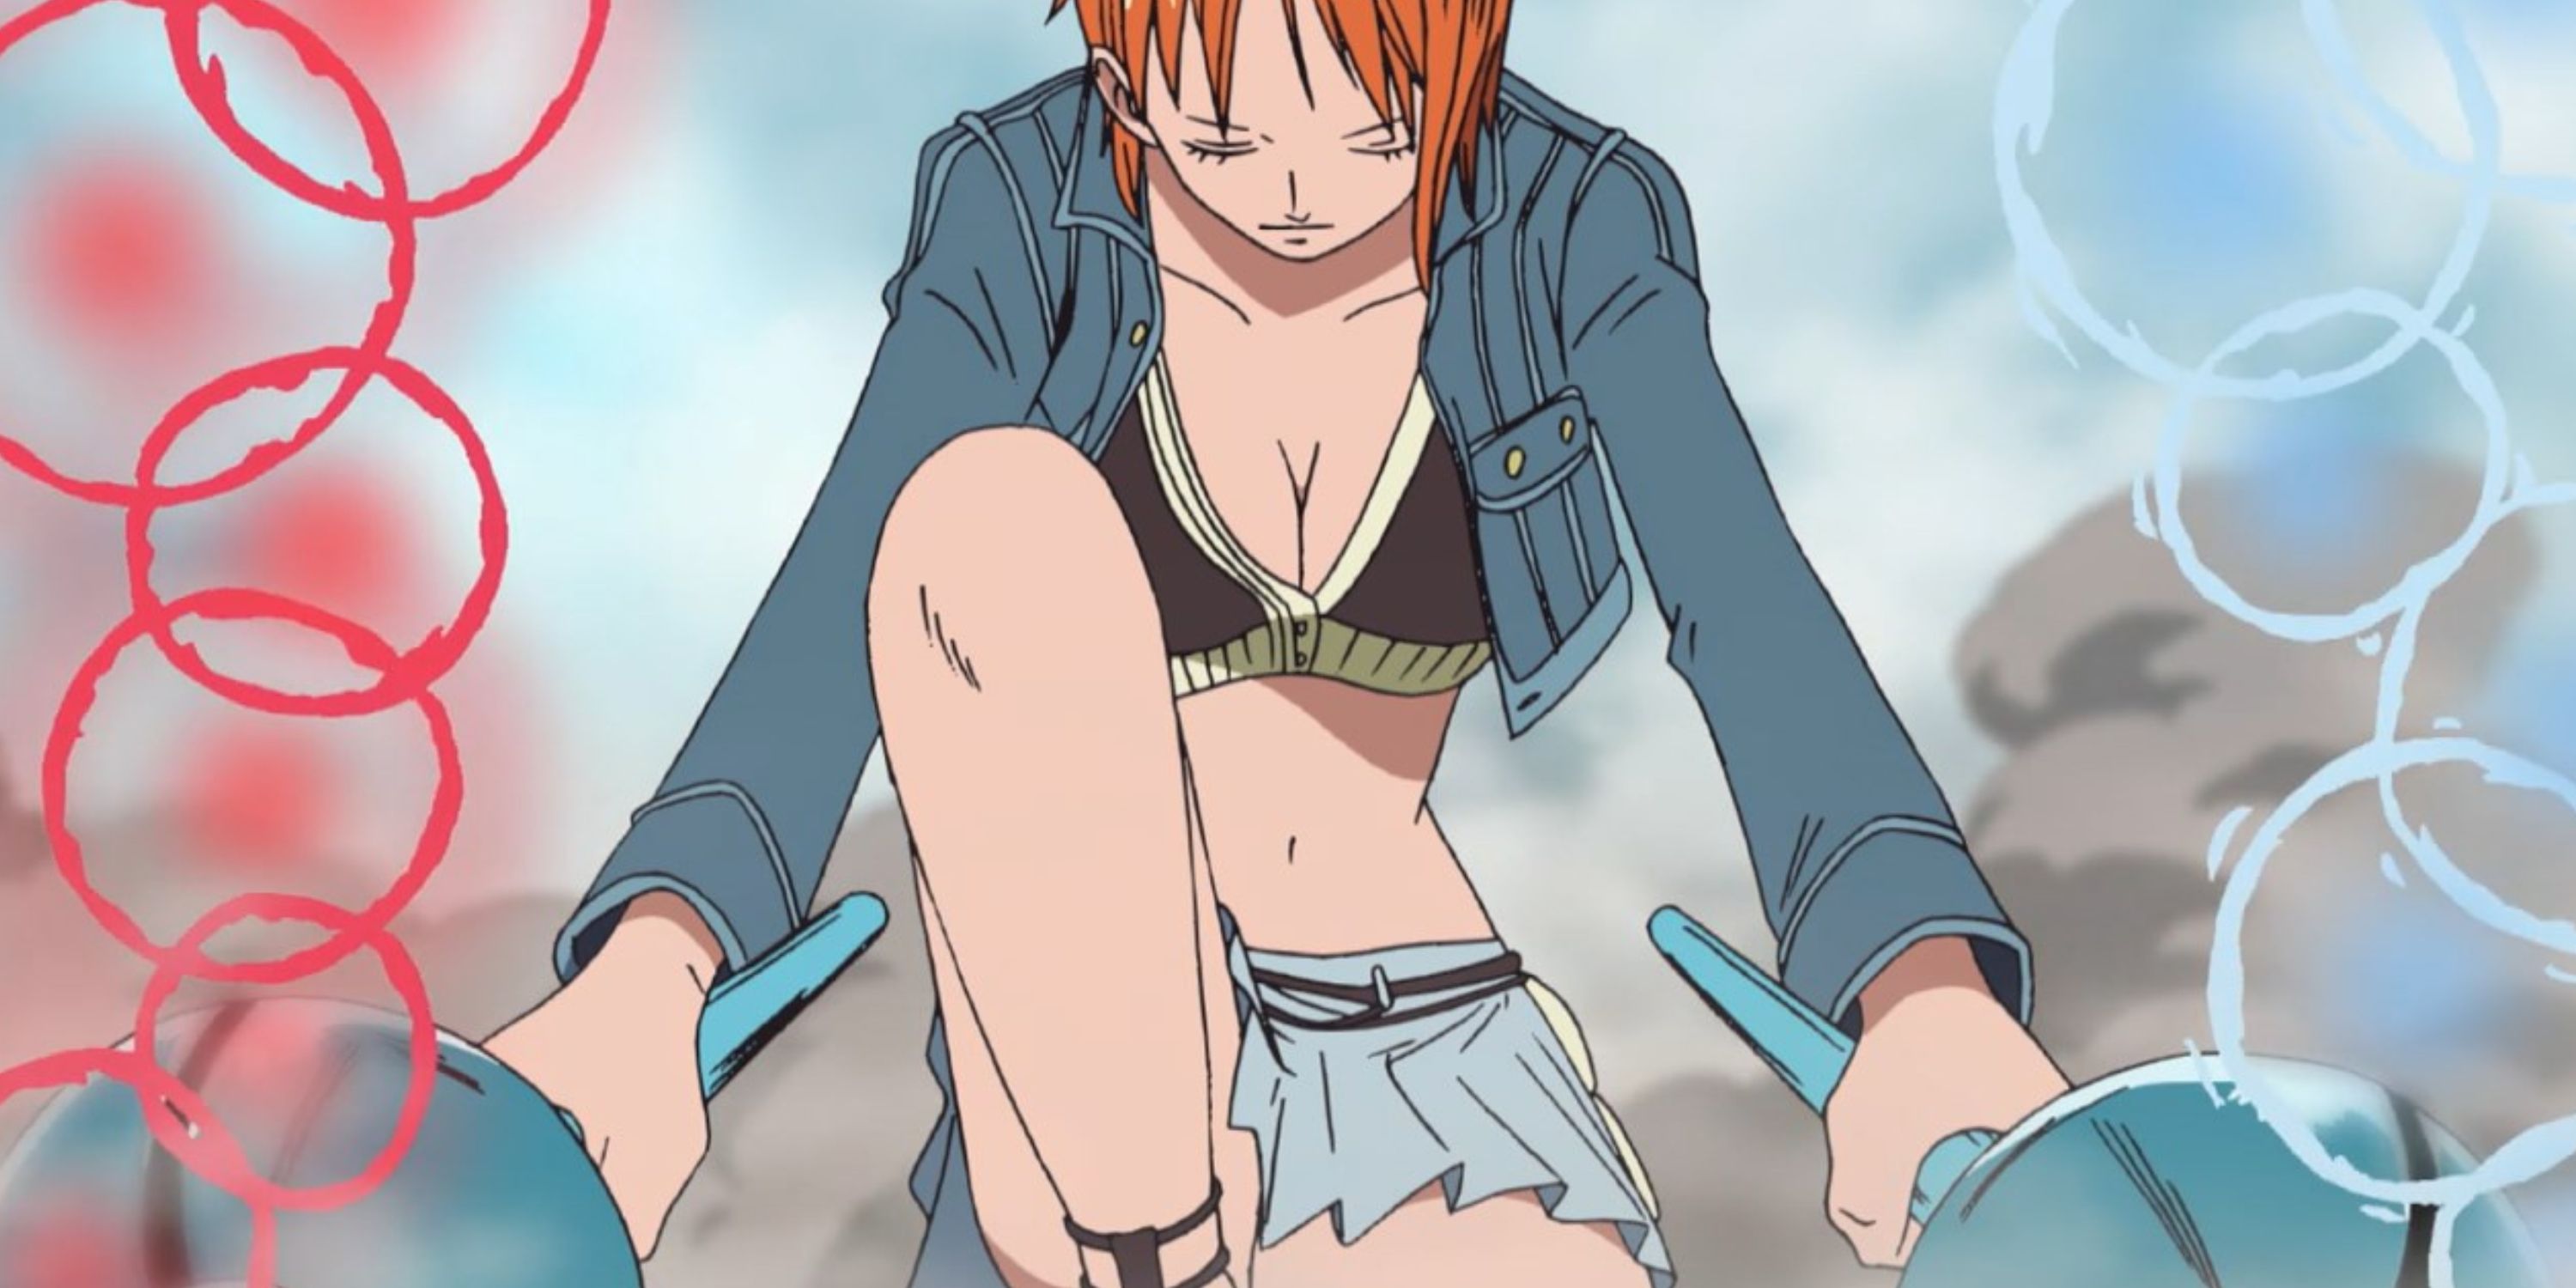 Nami wielding the Clima-Tact during One Piece's Enies Lobby arc.